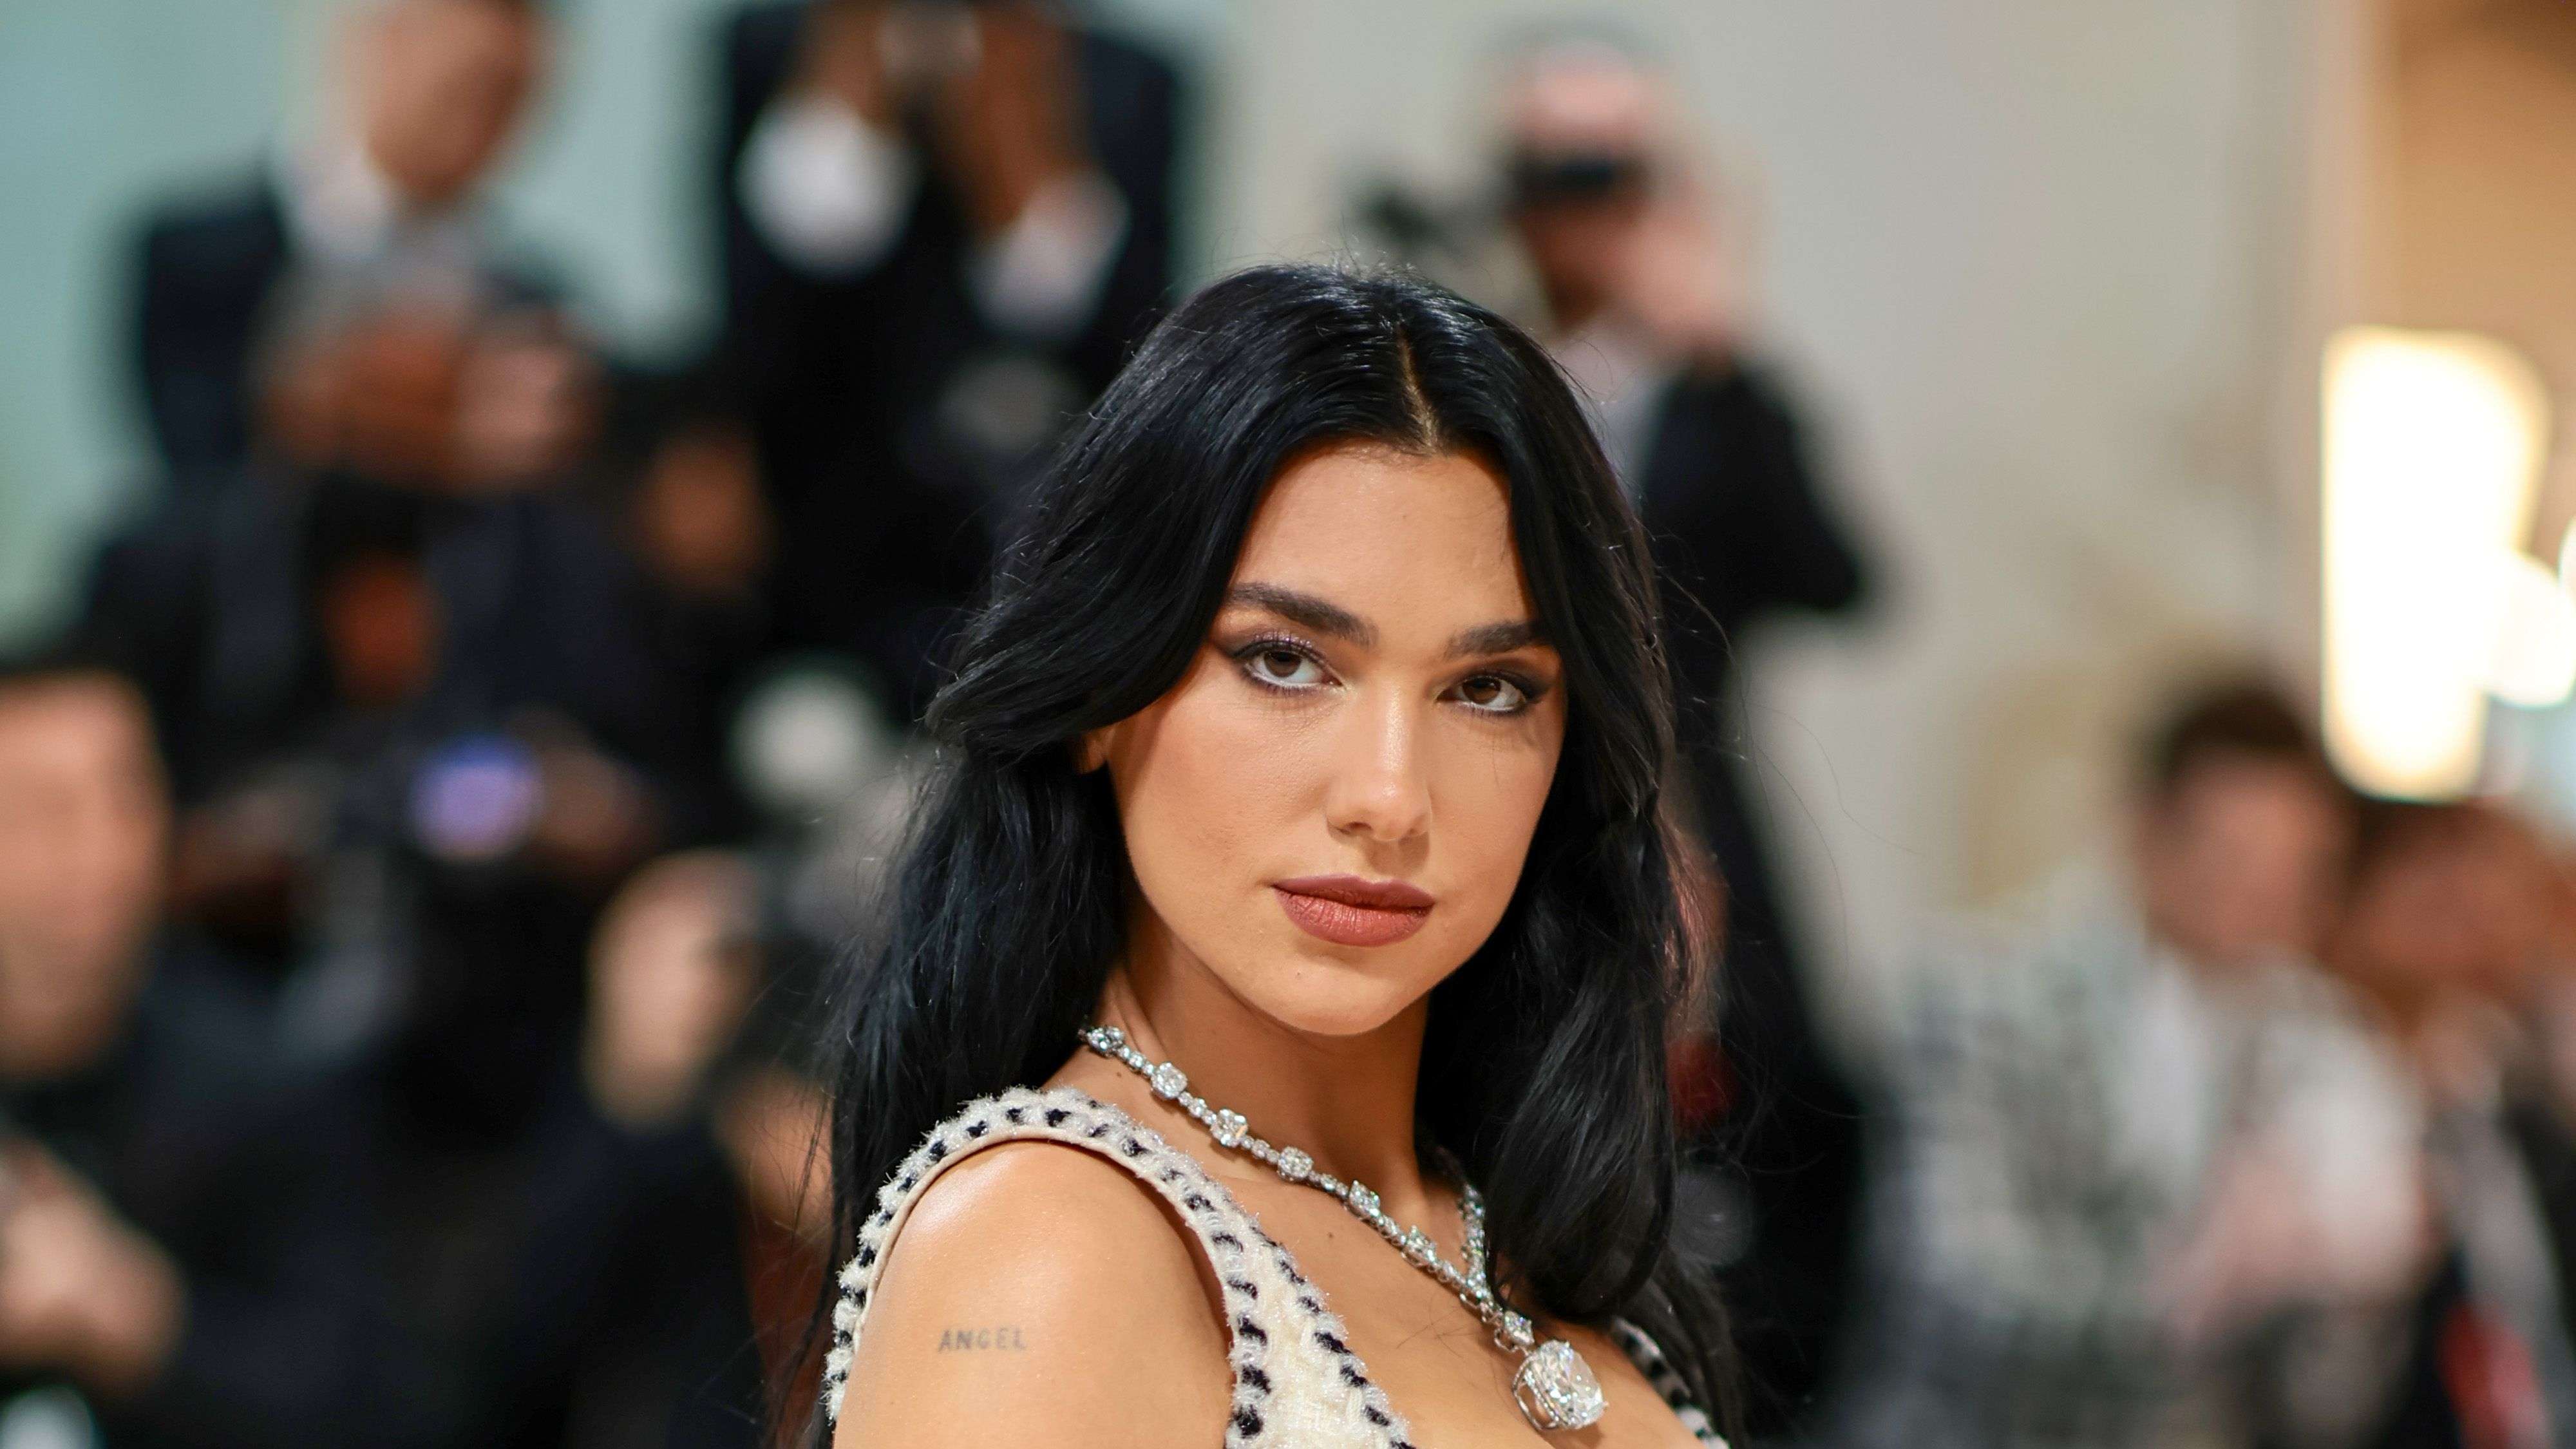 Dua Lipa to perform at 2023 ODI World Cup Closing Ceremony